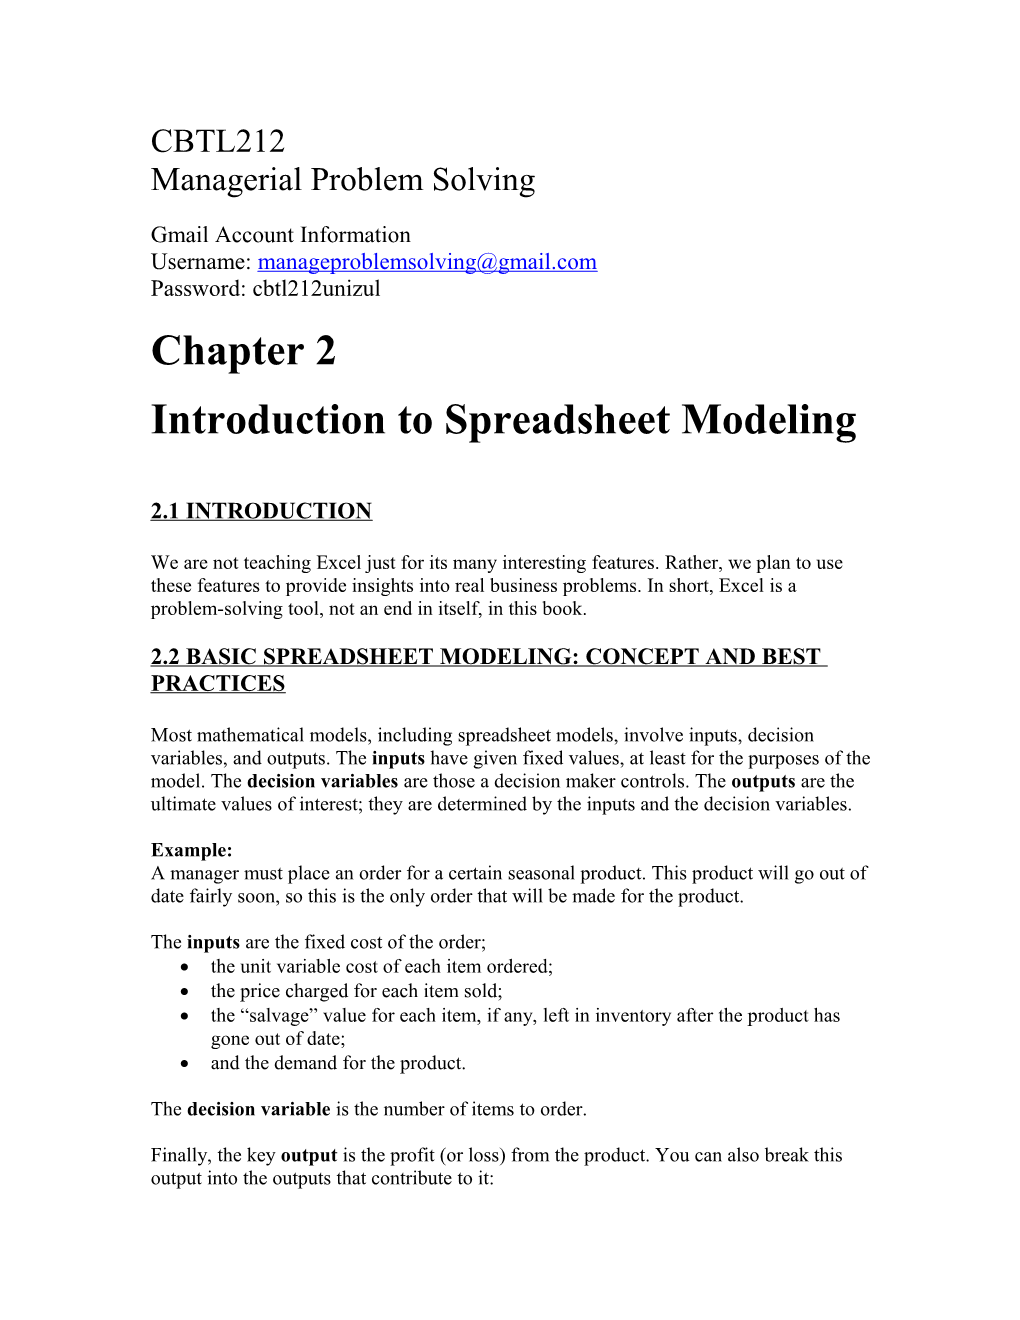 2.2 Basic Spreadsheet Modeling: Concept and Best Practices